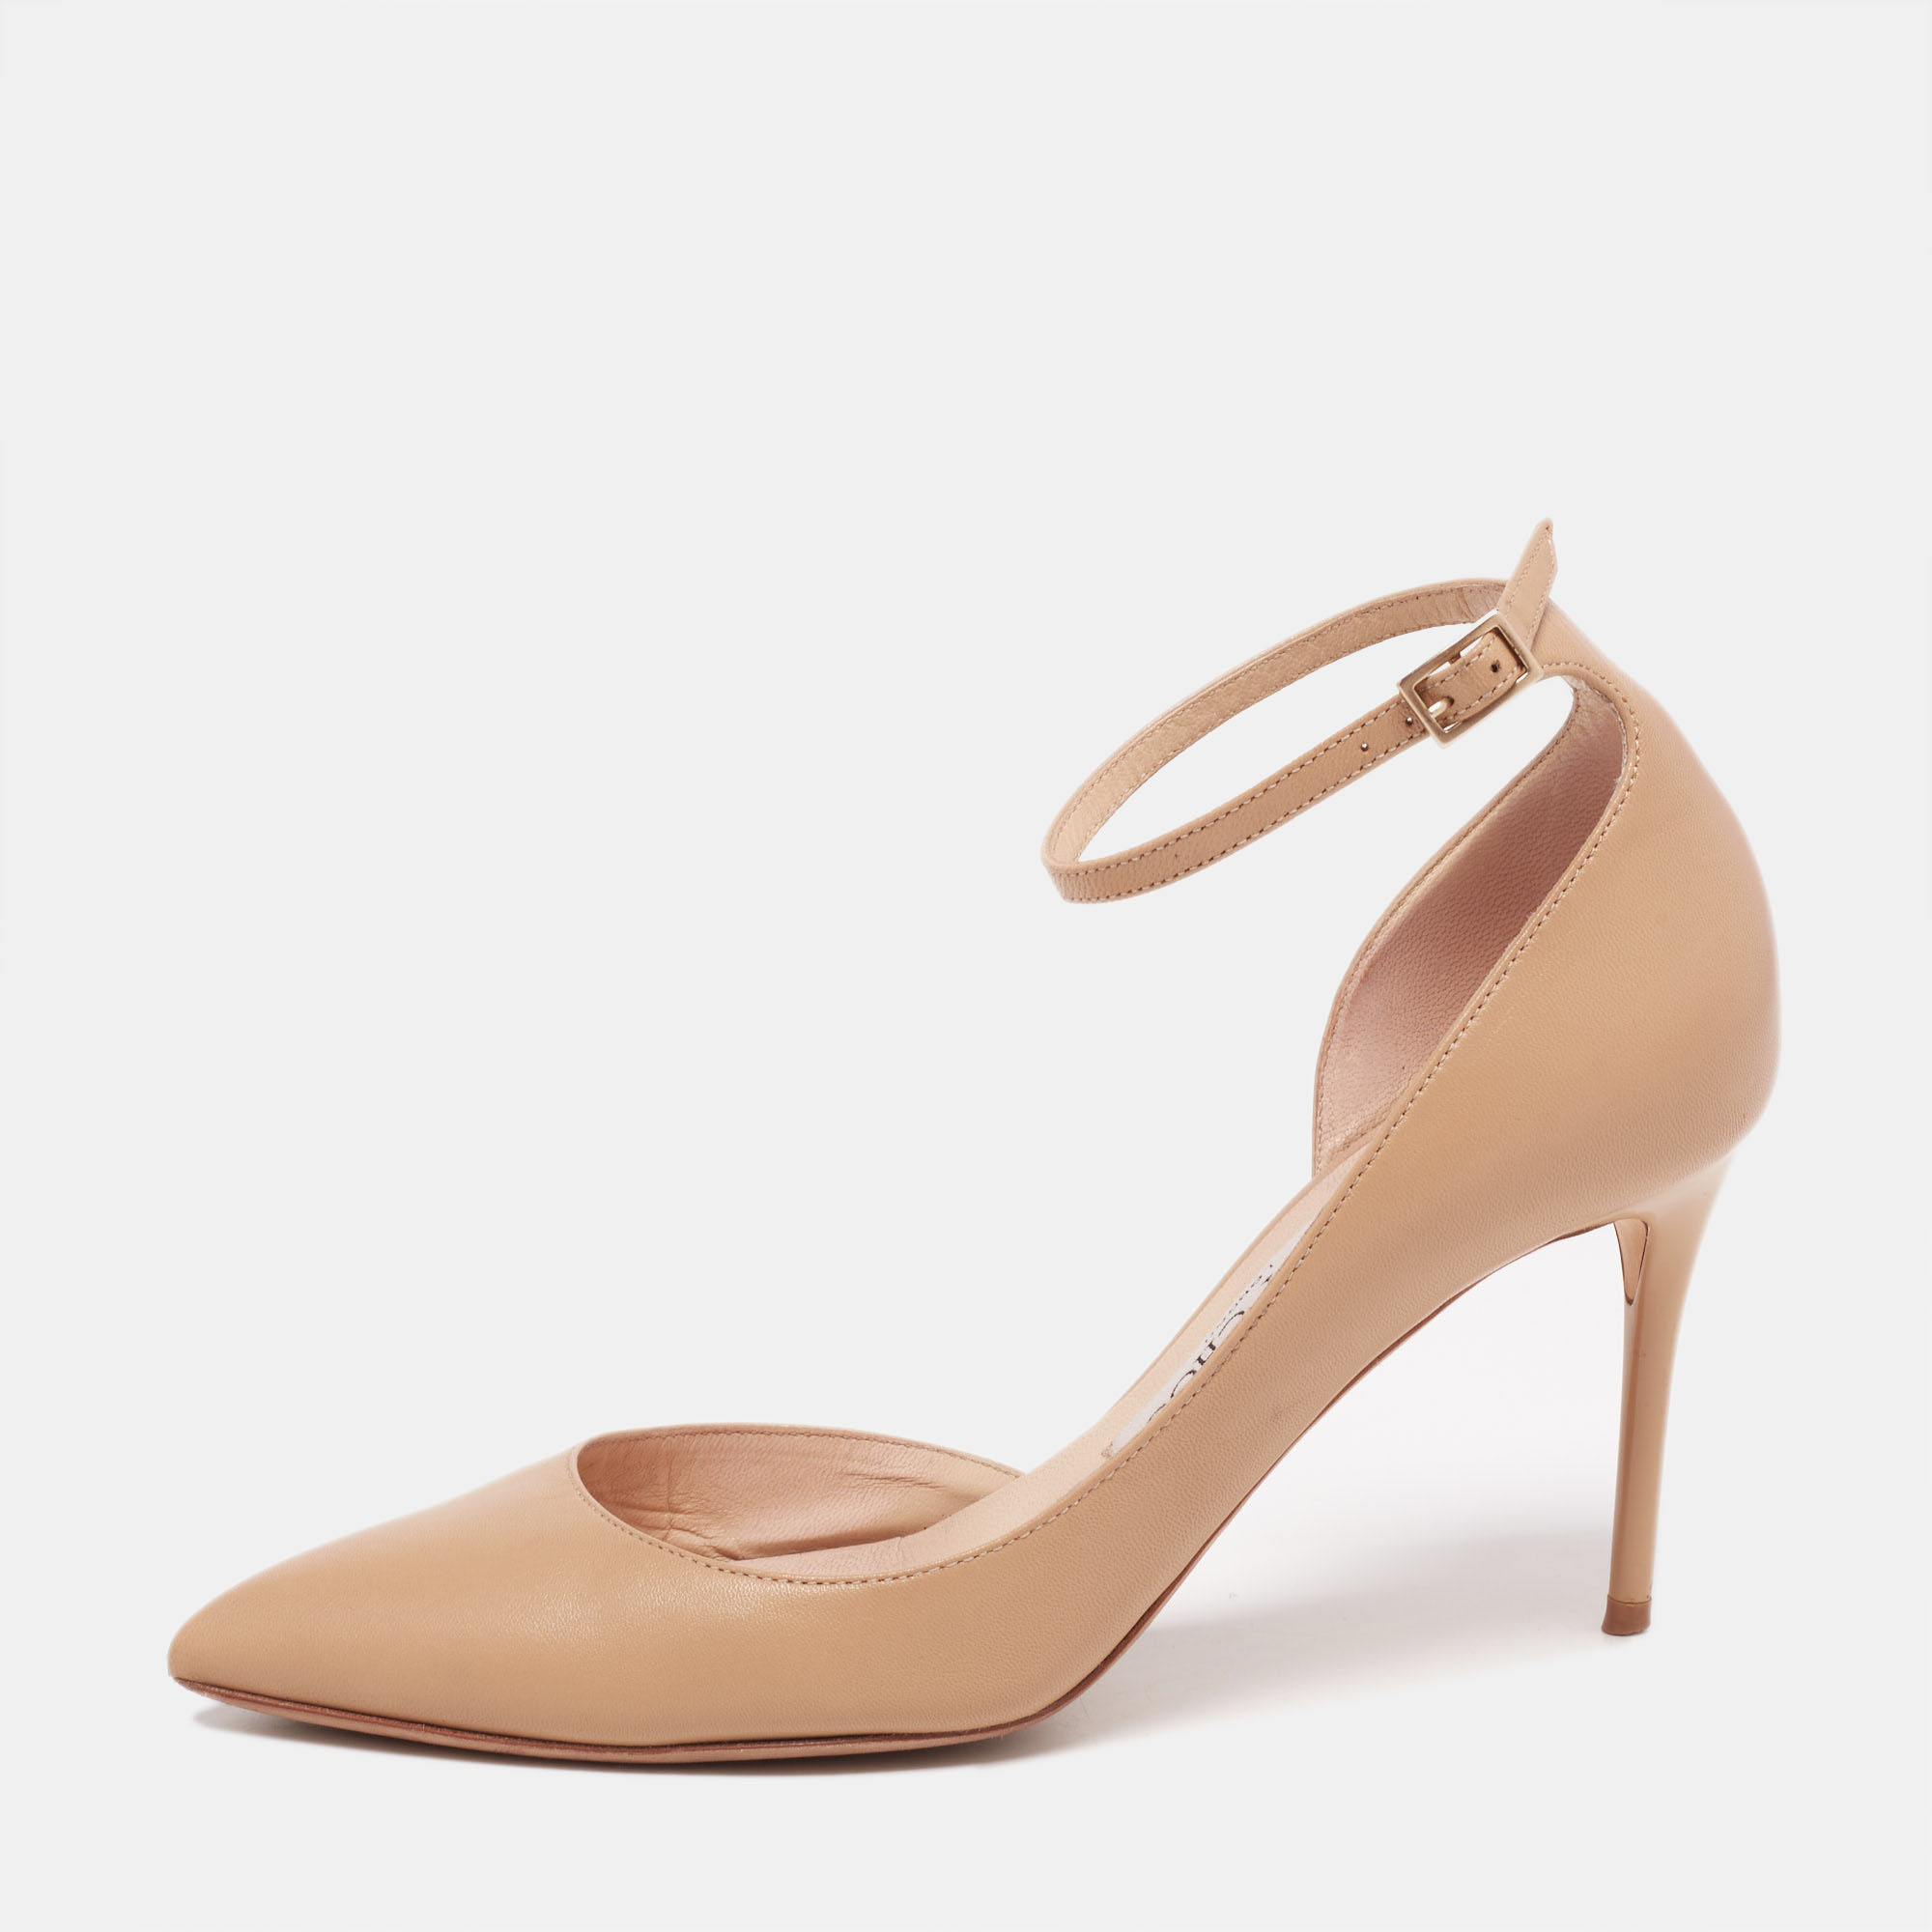 Jimmy Choo Beige Leather Lucy Ankle-Strap Pumps Size 35.5